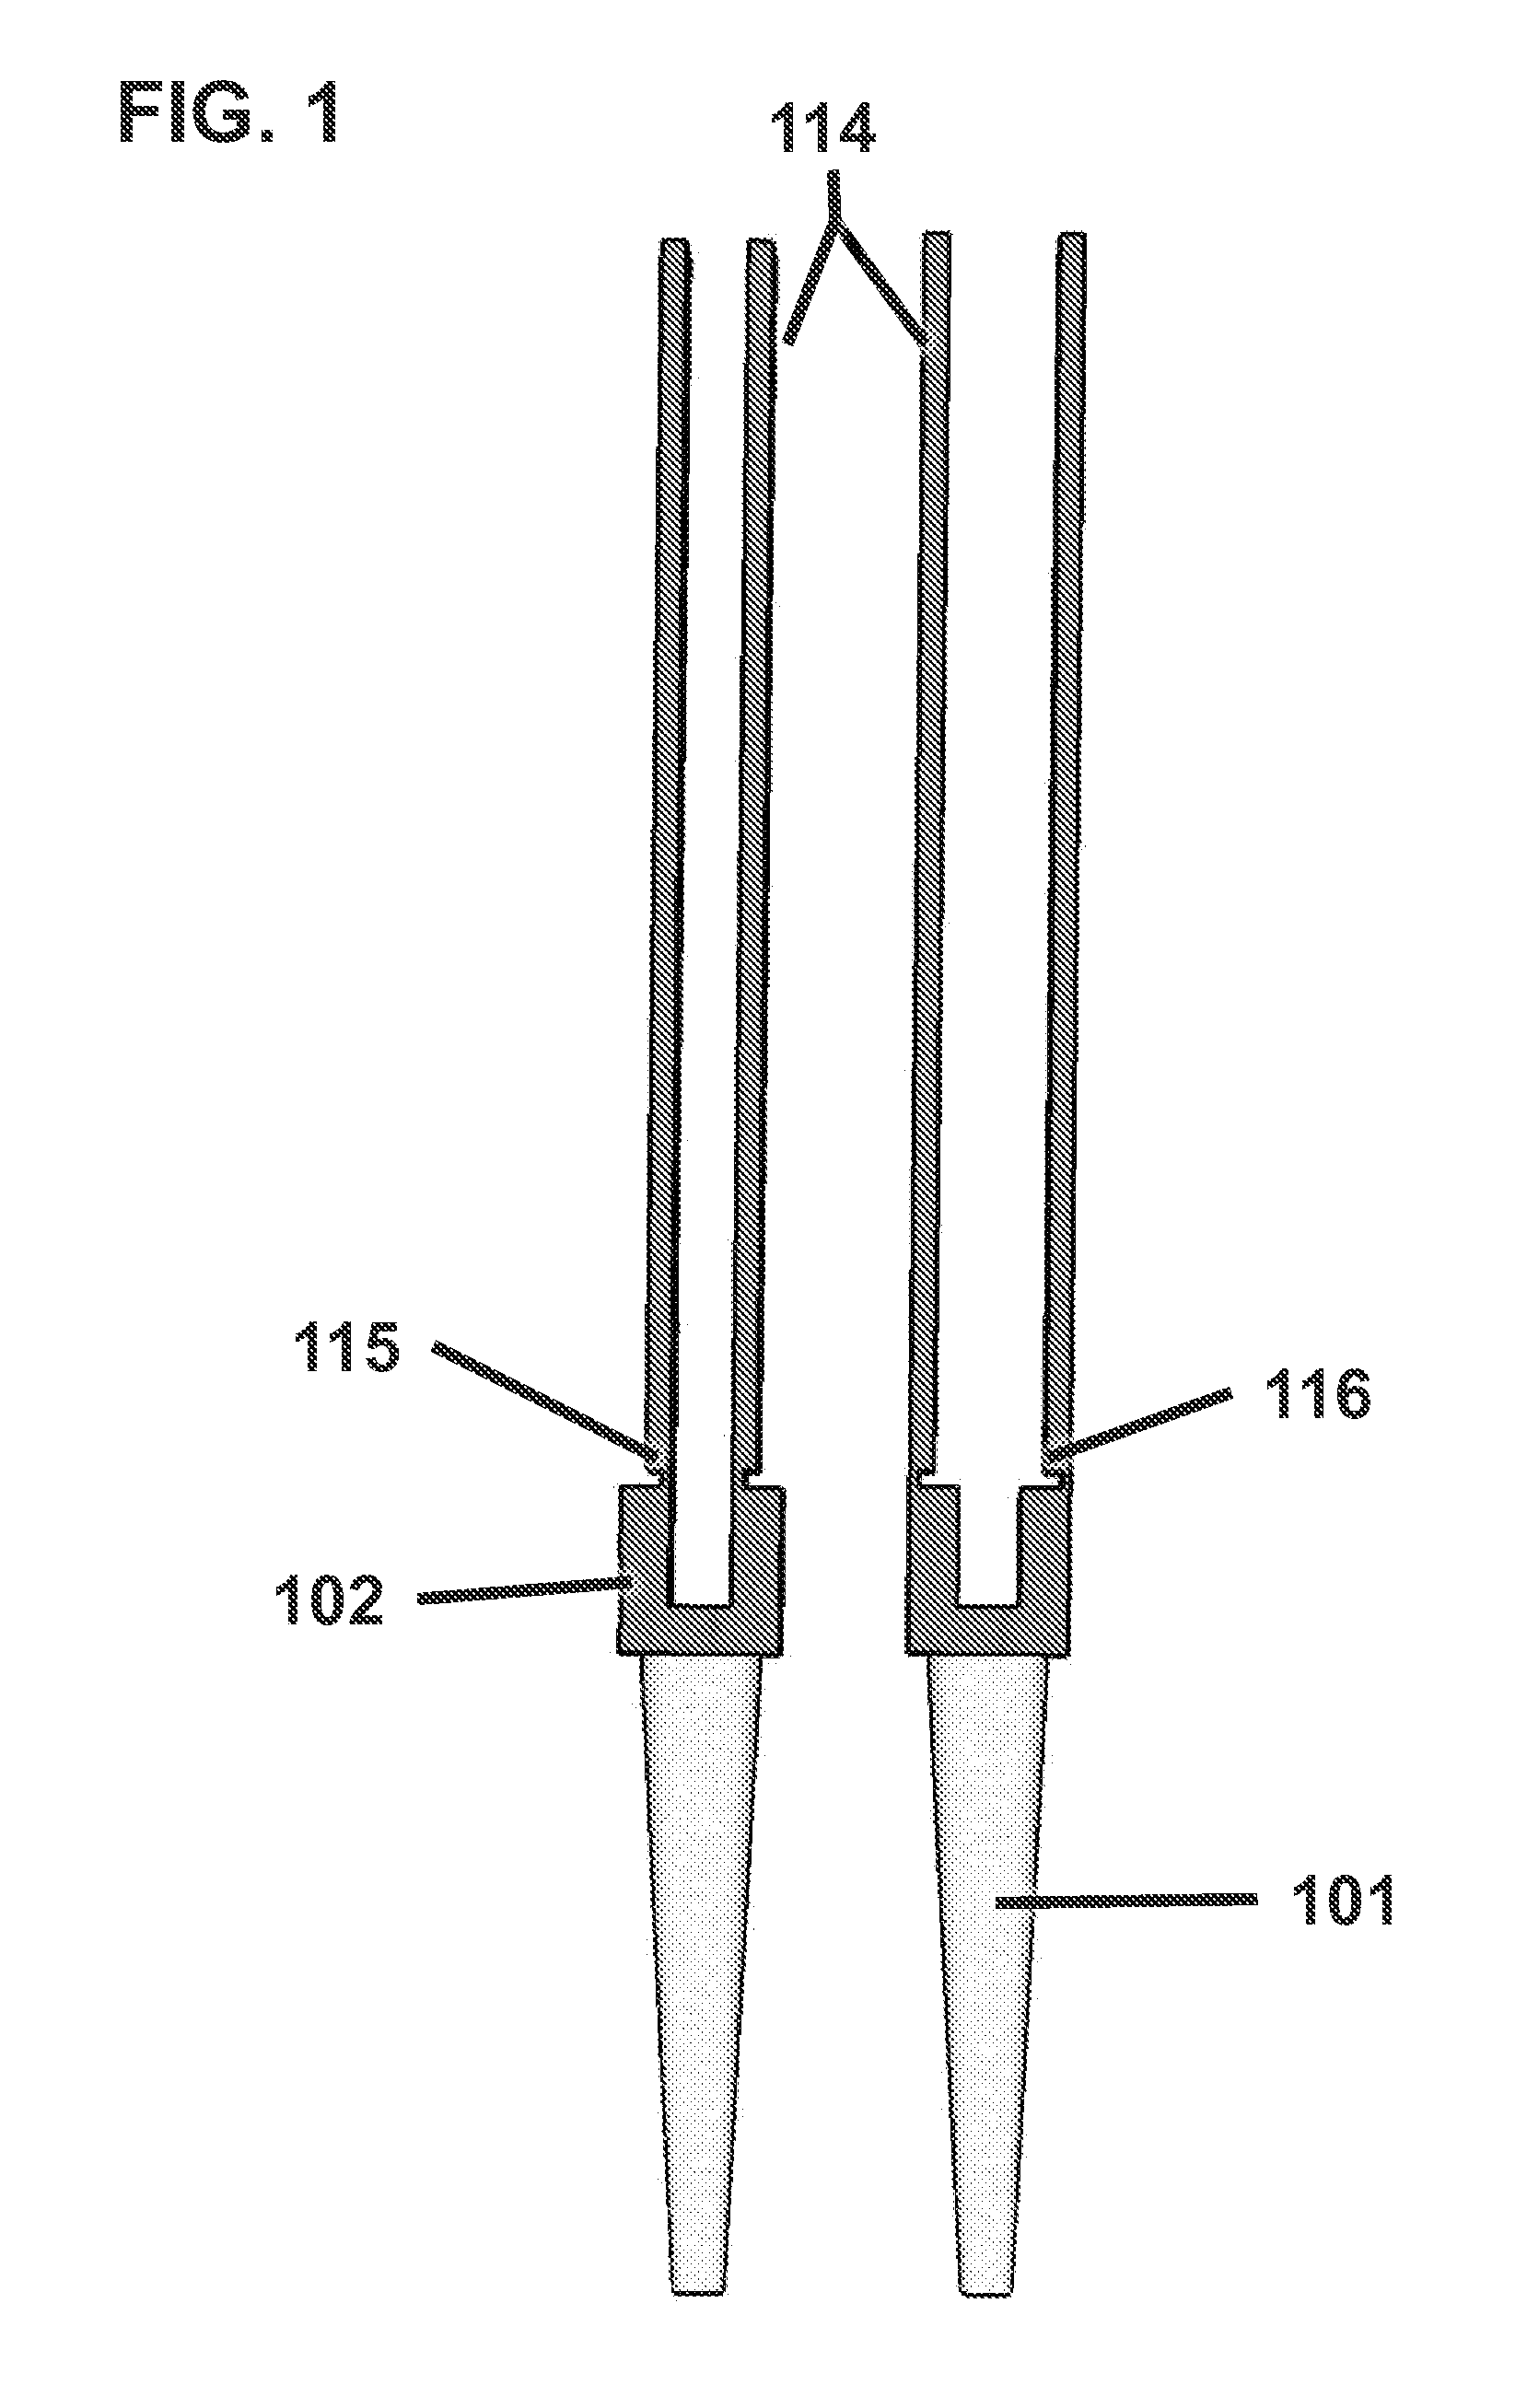 Systems and methods for pedicle screw stabilization of spinal vertebrae